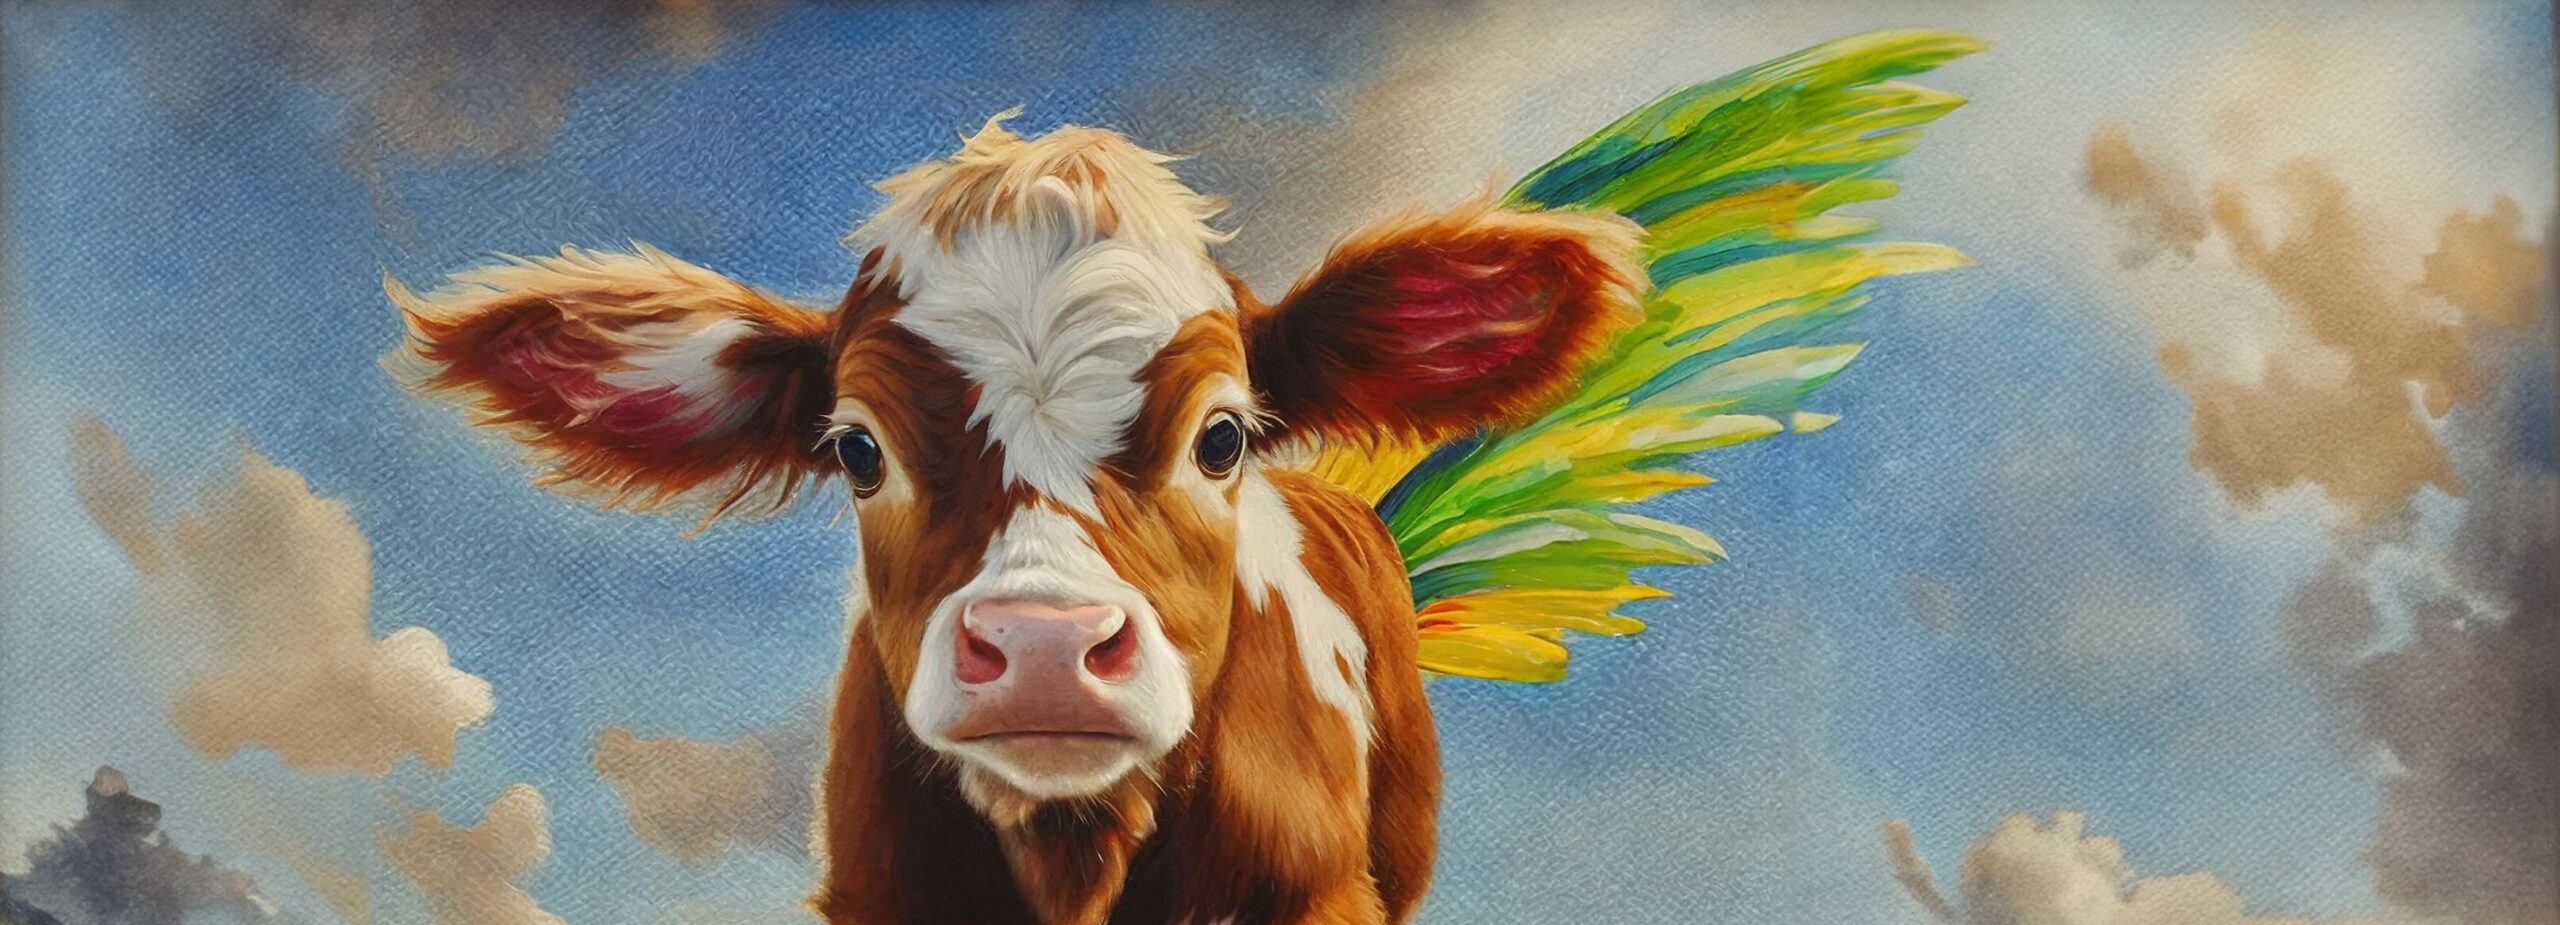 A painting style picture of a brown calf in front of a blue sky.